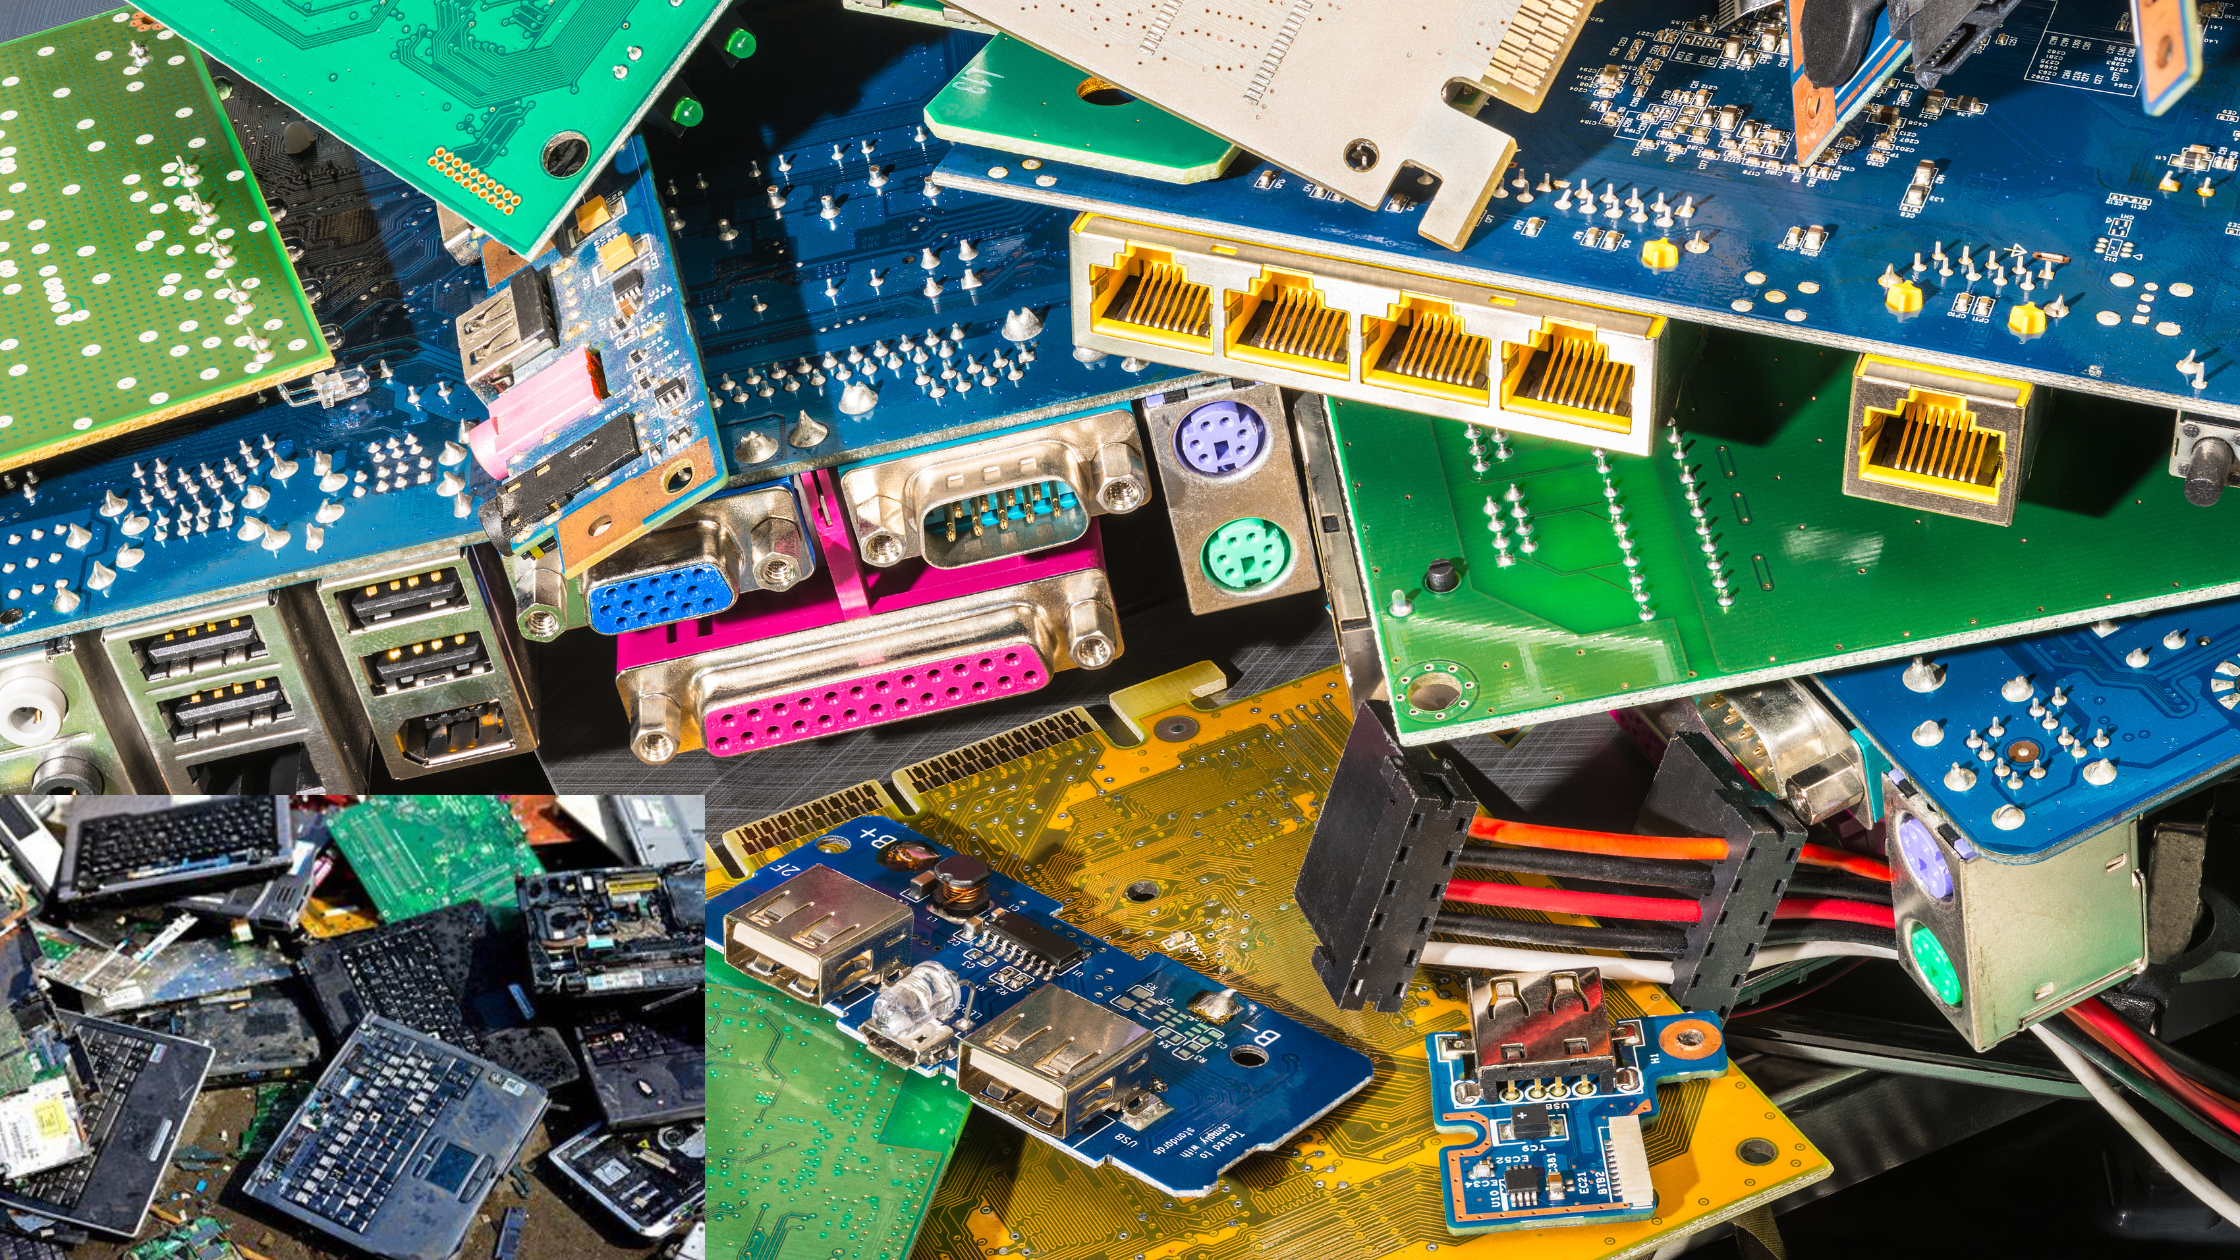 E-waste Management and Recycling